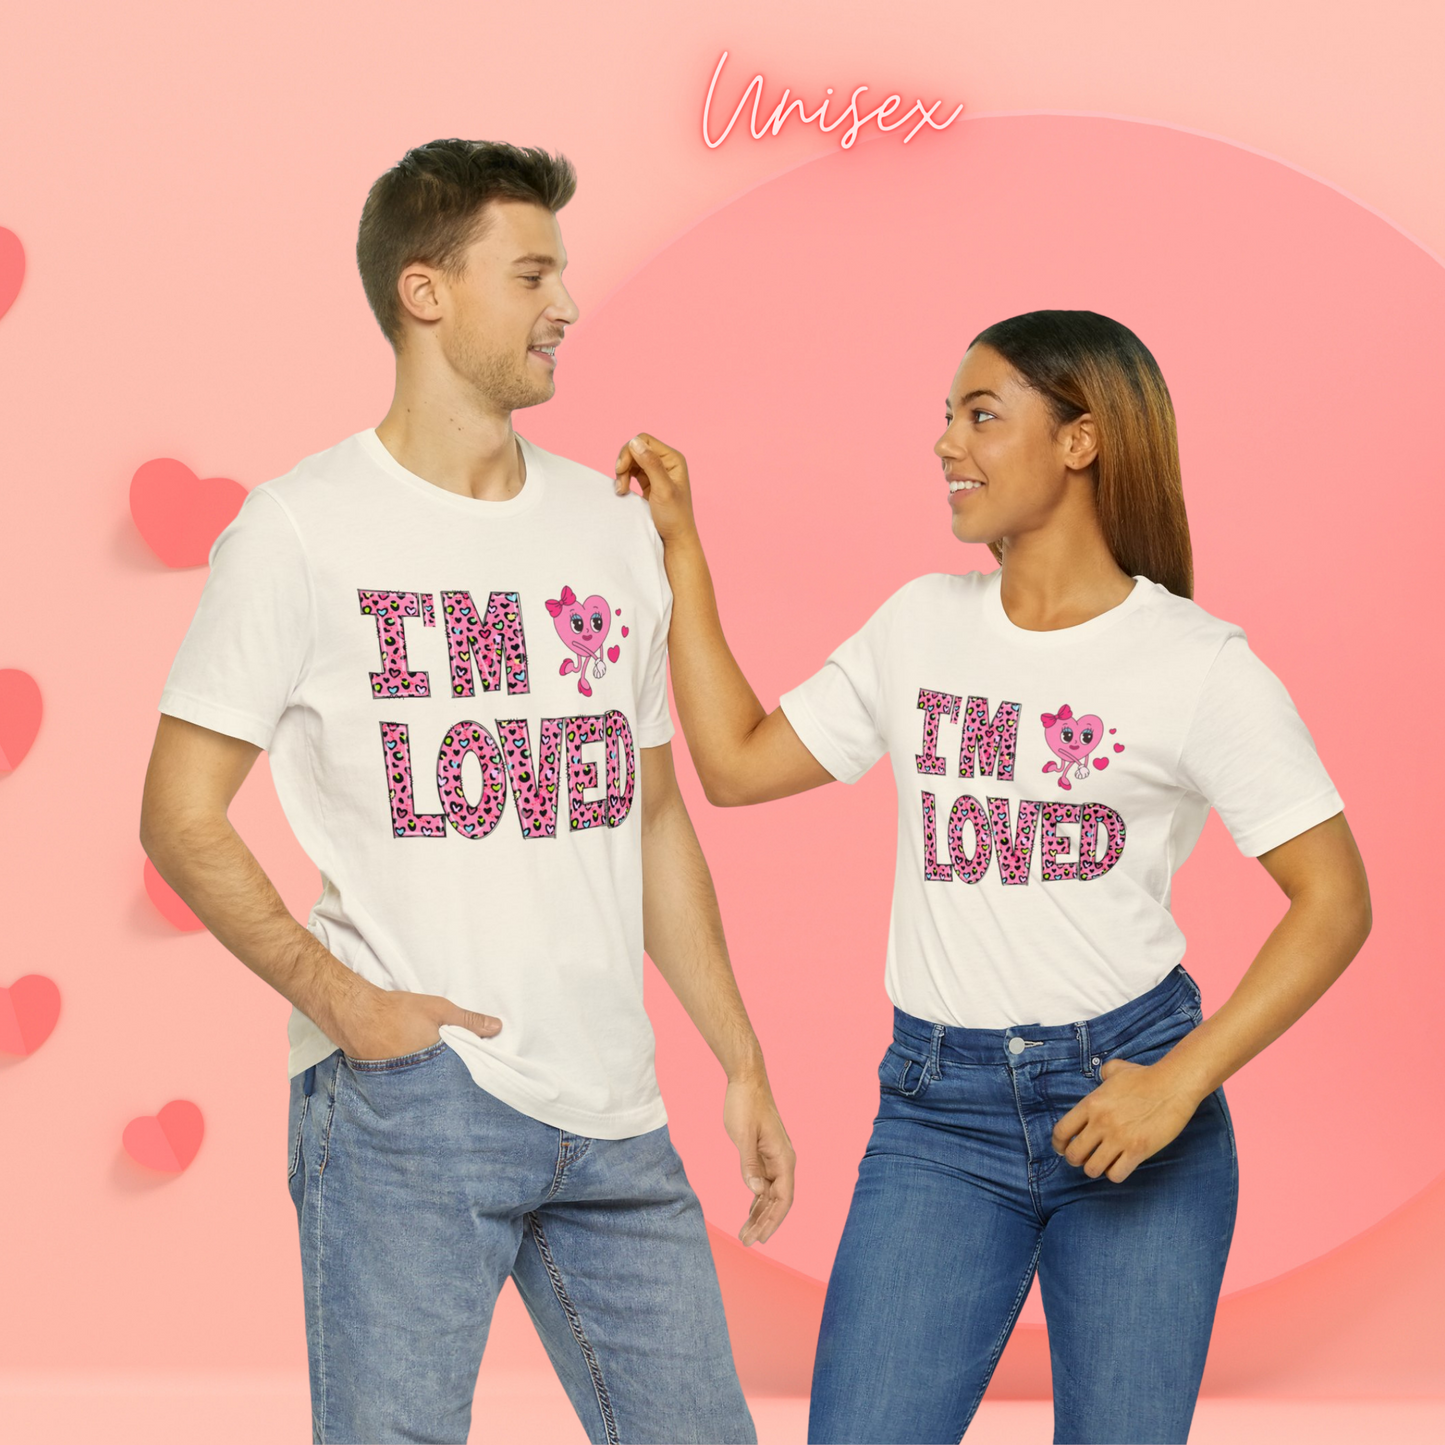 "I'm Loved" Print Crew Neck T-shirt for Women - Casual Tee for Spring & Summer